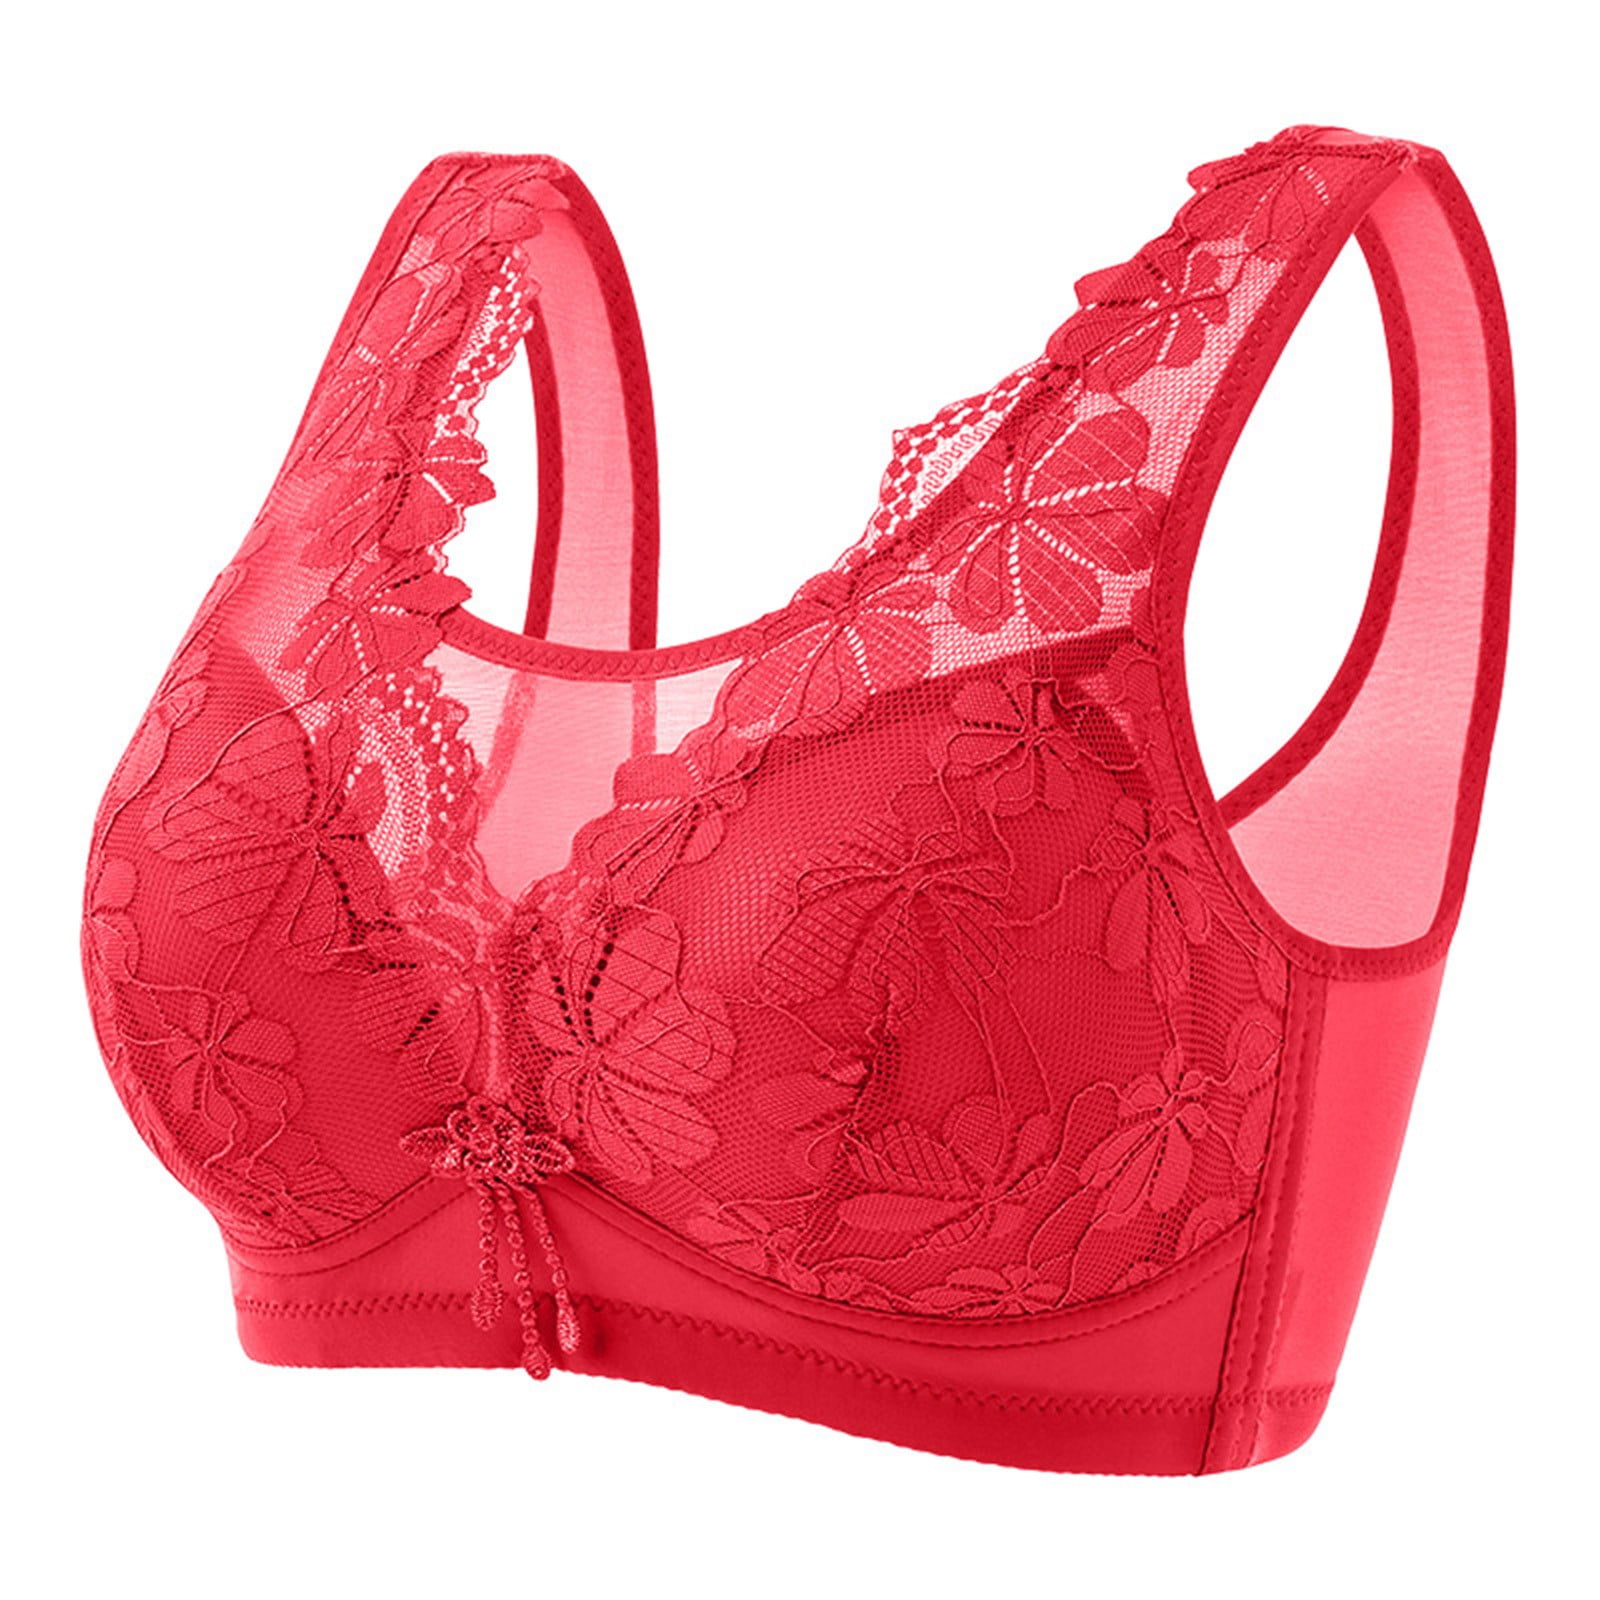 safuny Everyday Bra for Women Lace Ultra Light Lingerie Thin and